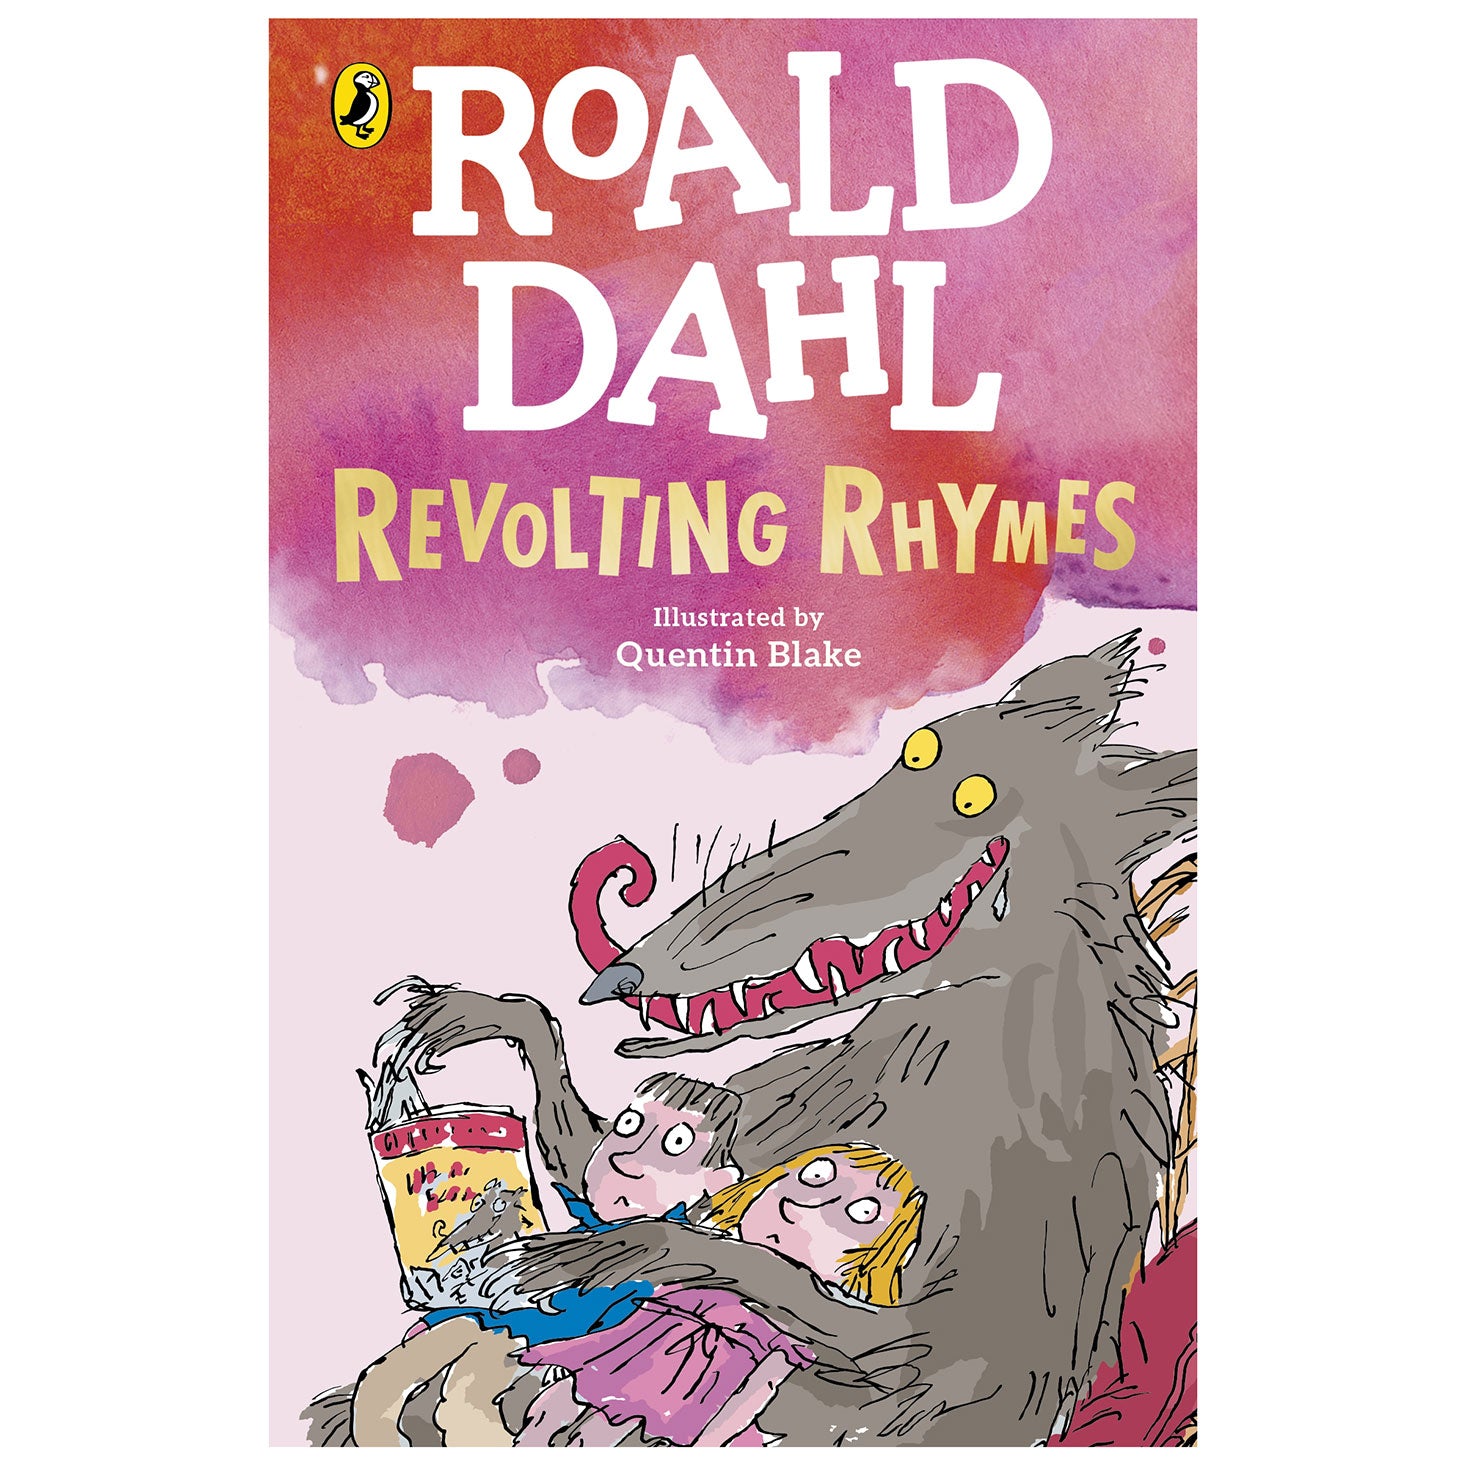 Revolting Rhymes by Roald Dahl with illustrations by Quentin Blake